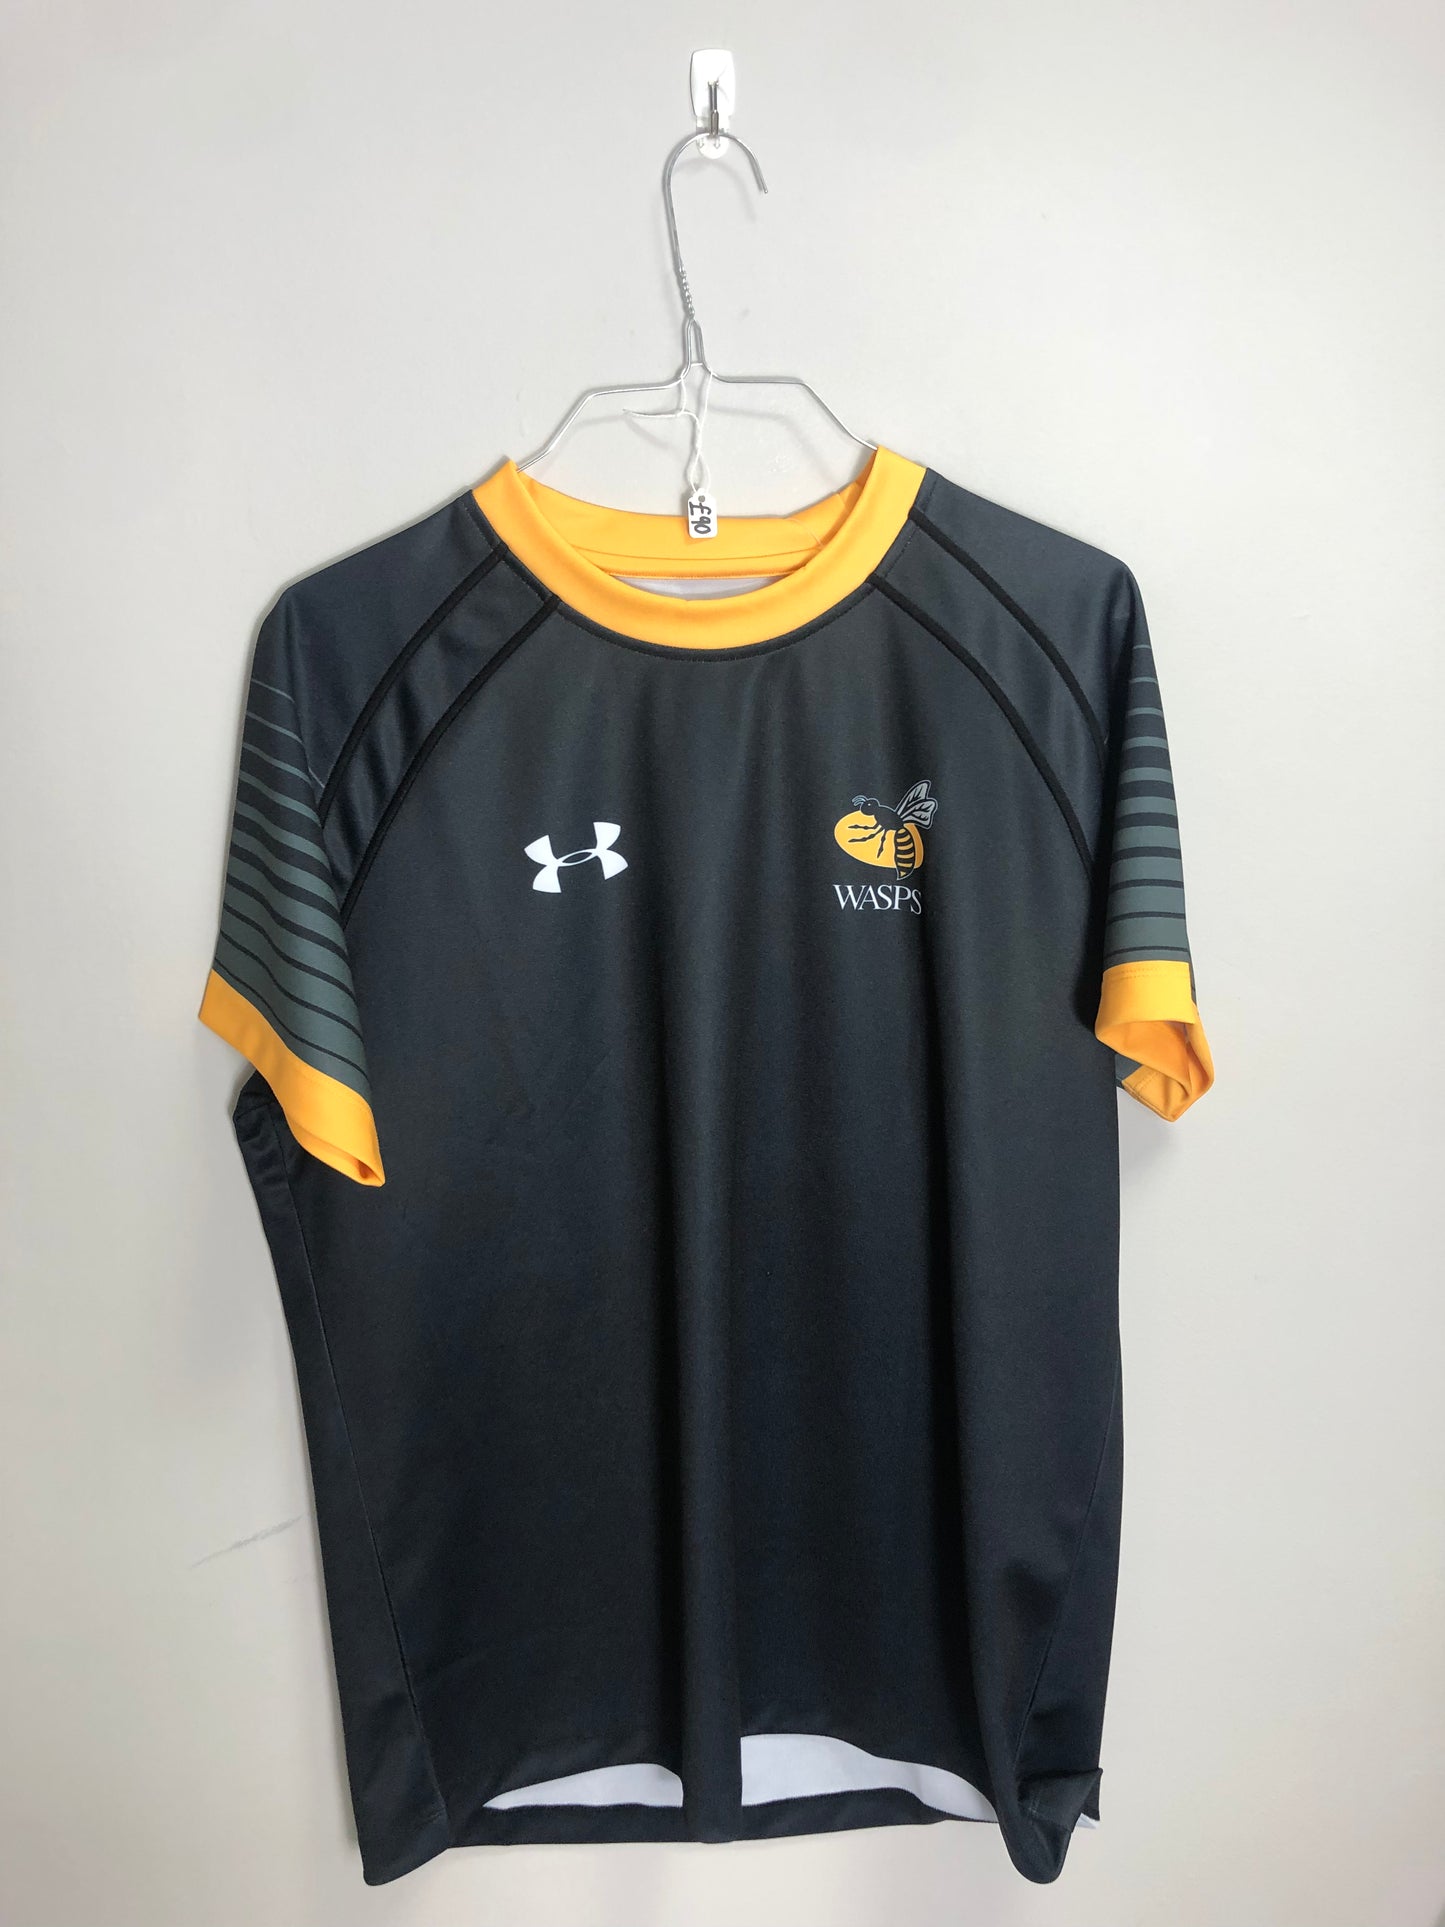 Wasps Rugby Player Issue Sample Shirt - 46” Chest - Large - #10